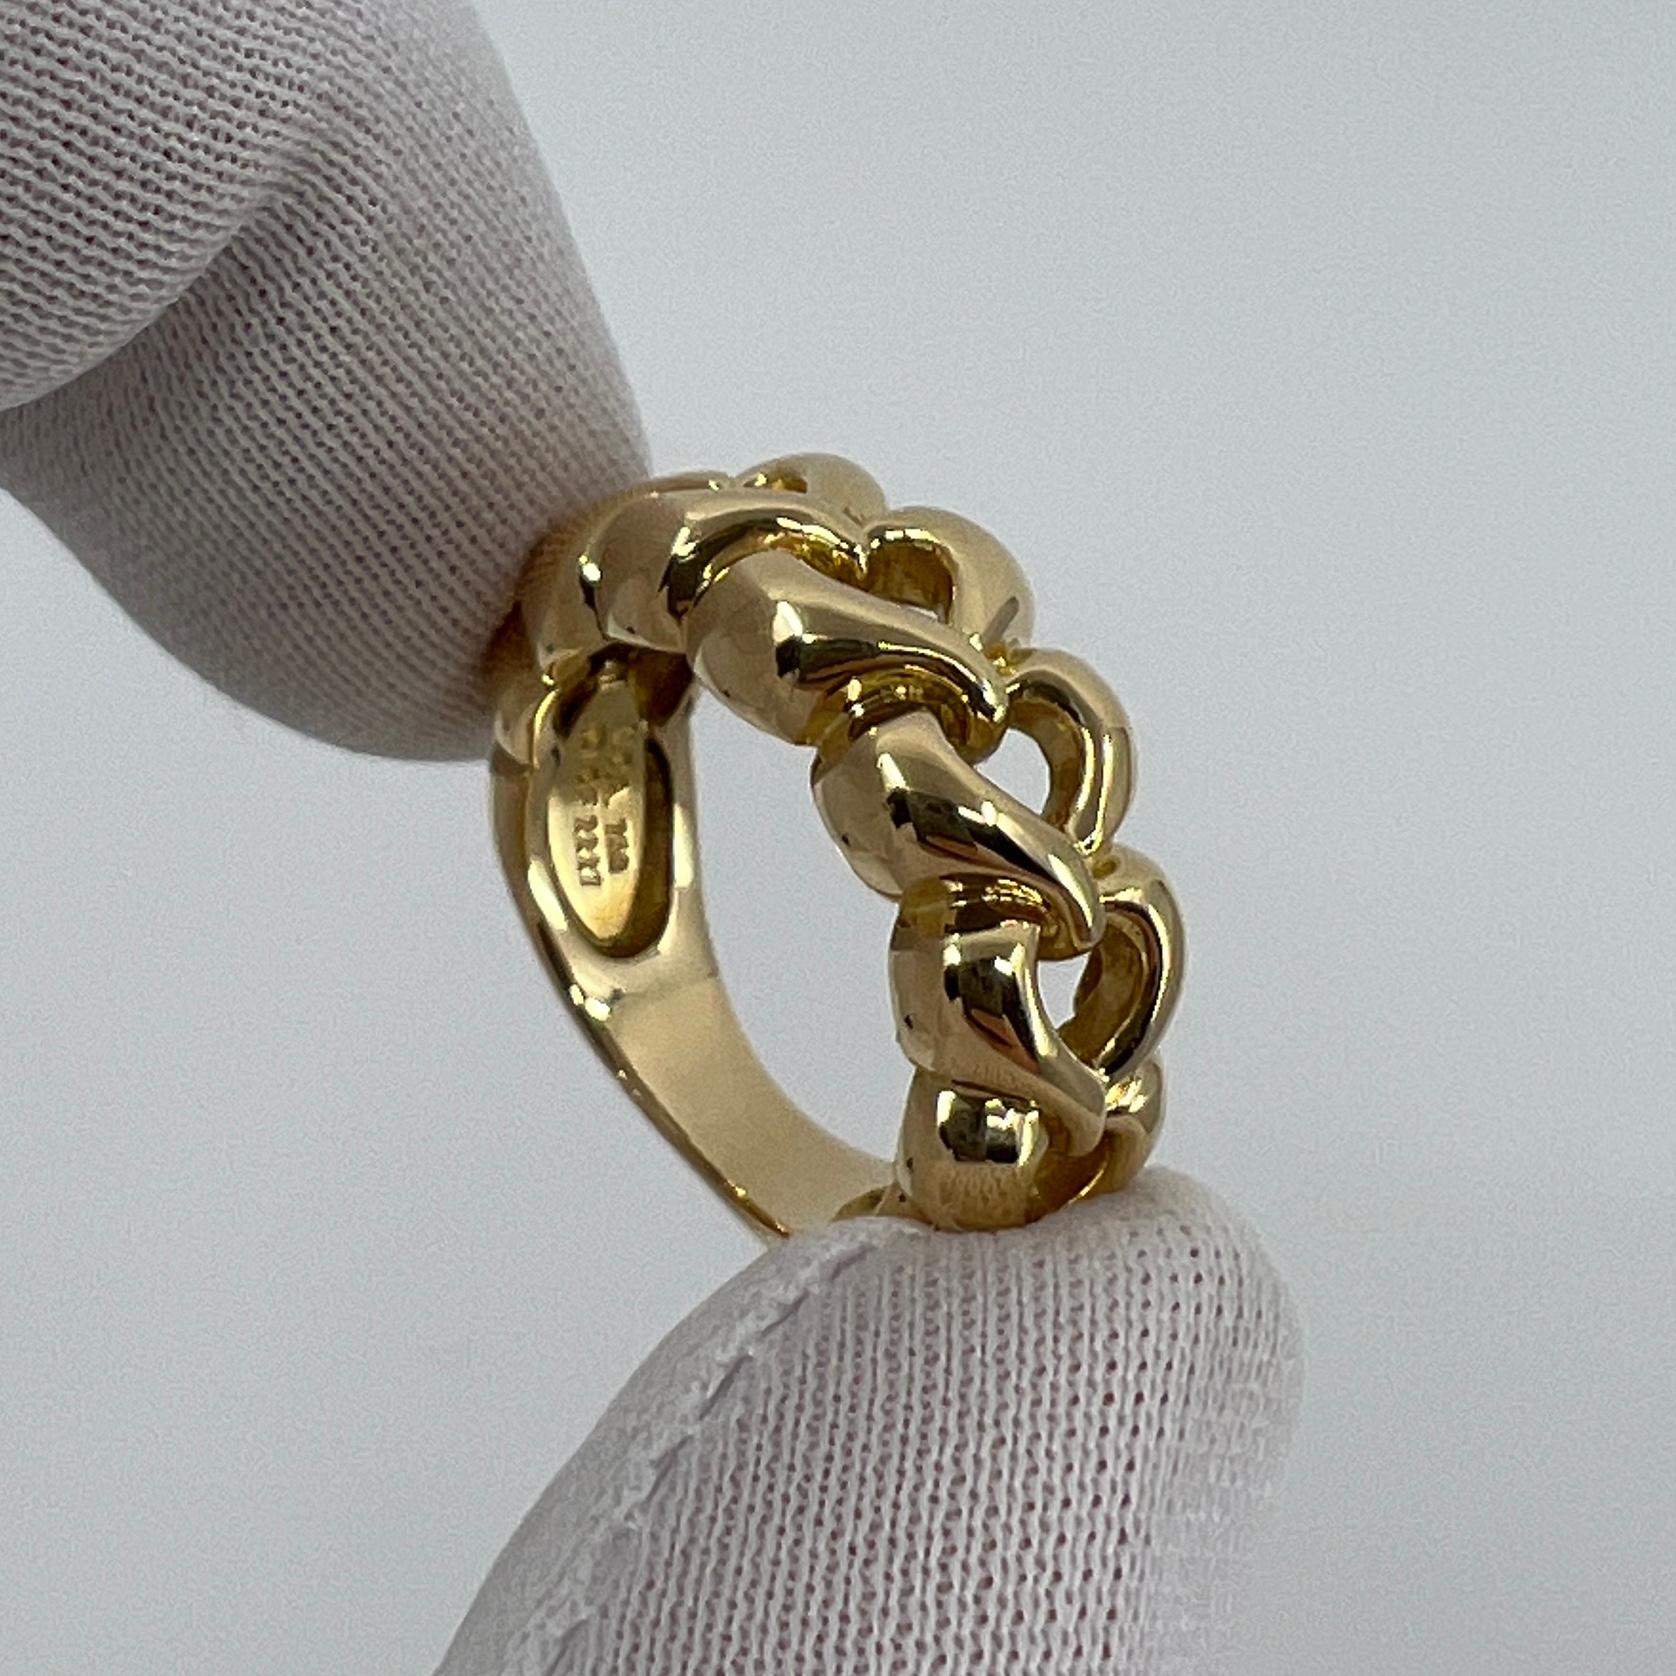 Rare Vintage Van Cleef & Arpels 18k Yellow Gold Open Heart Band Ring with Box 2